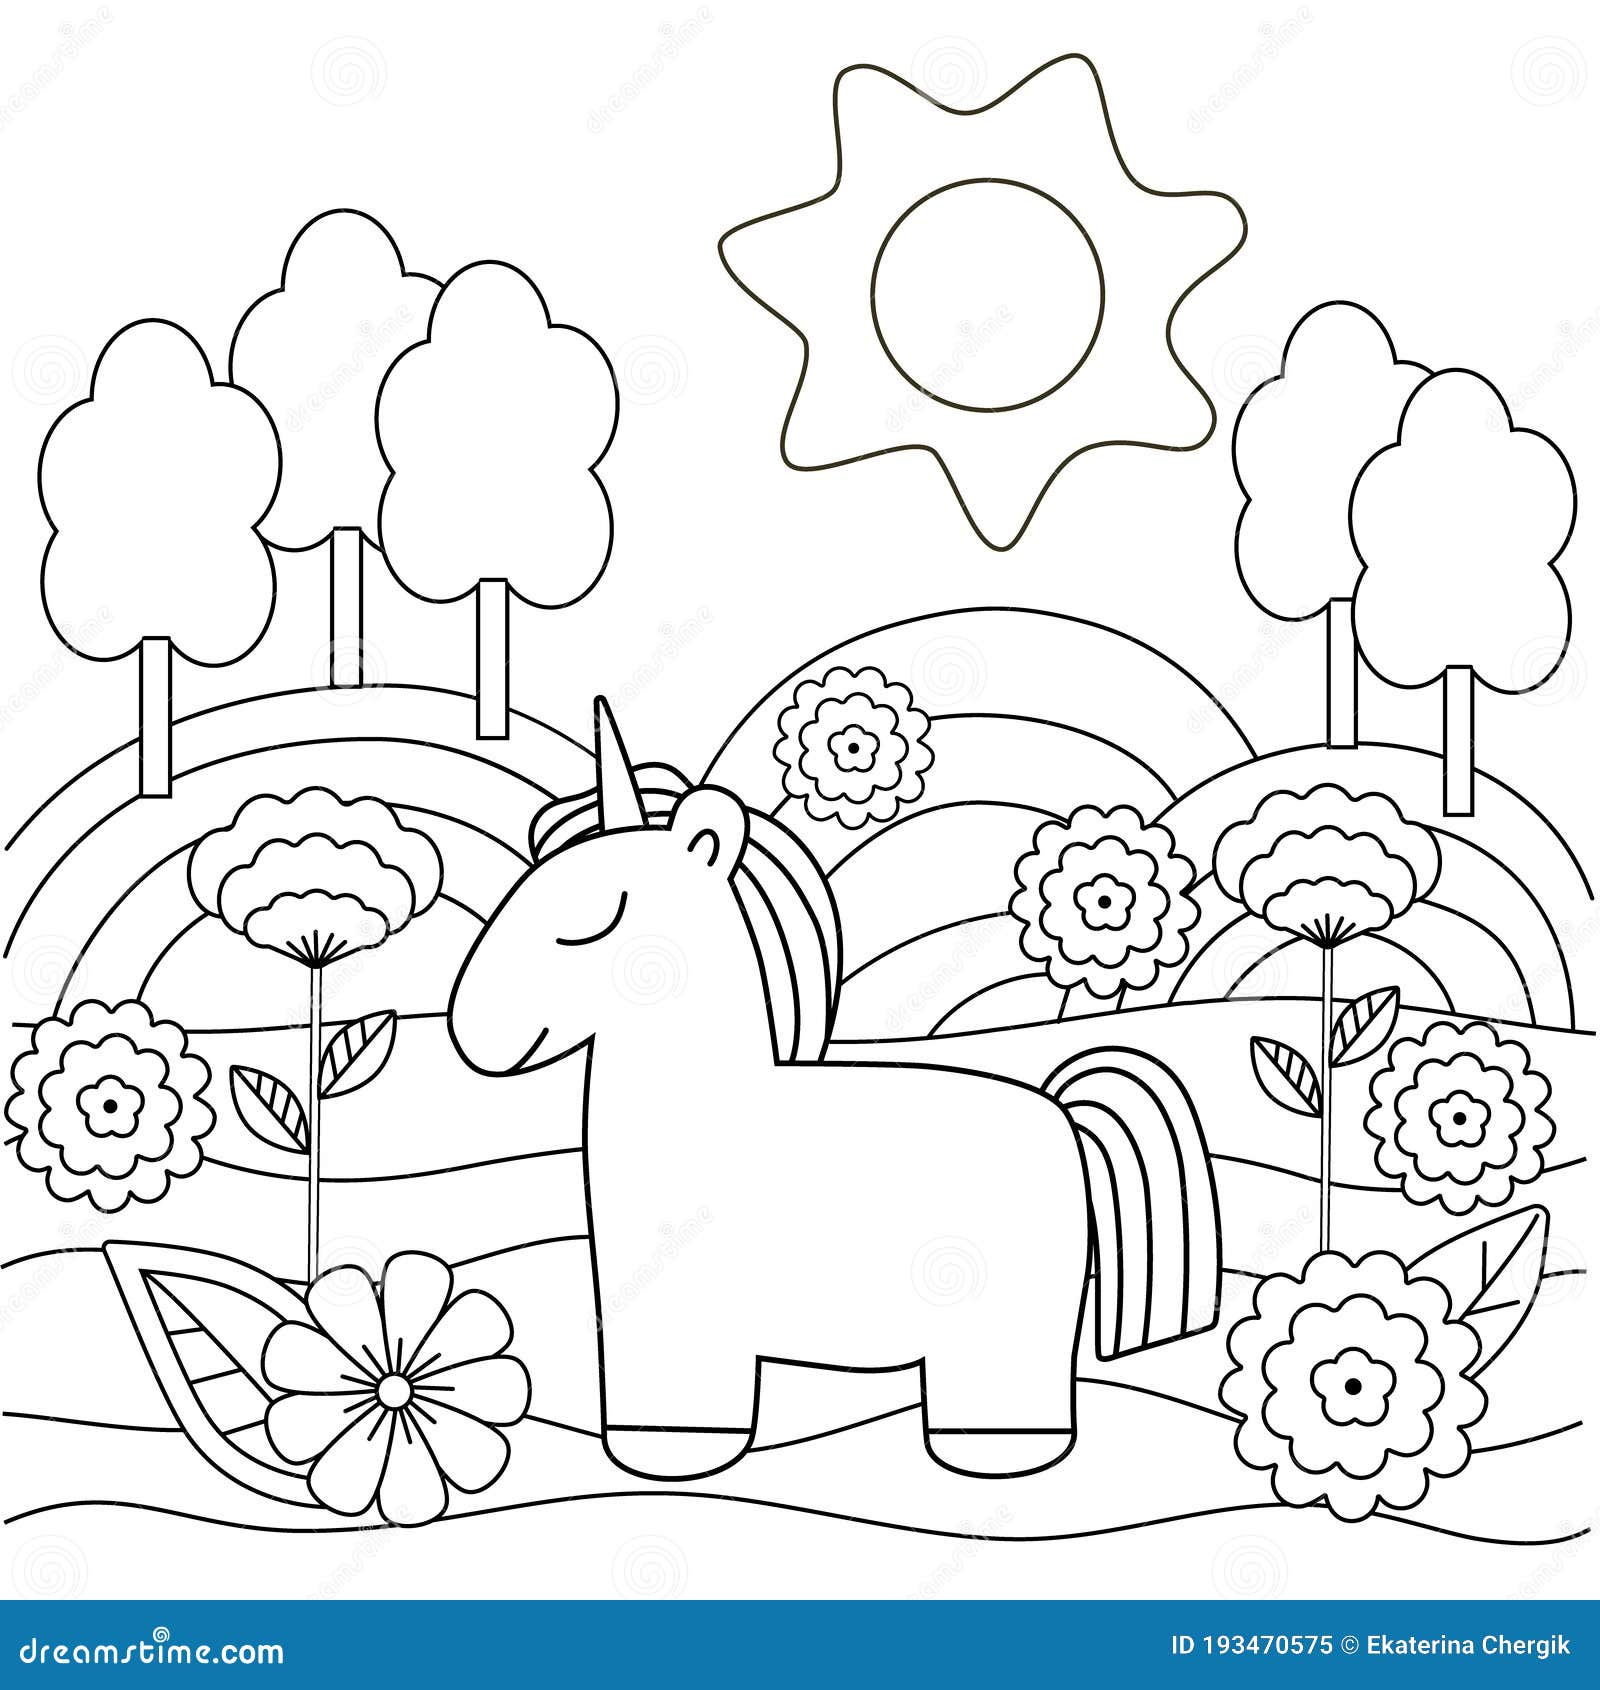 Cute Simple Kids Coloring Book with Unicorn. Stock Vector ...